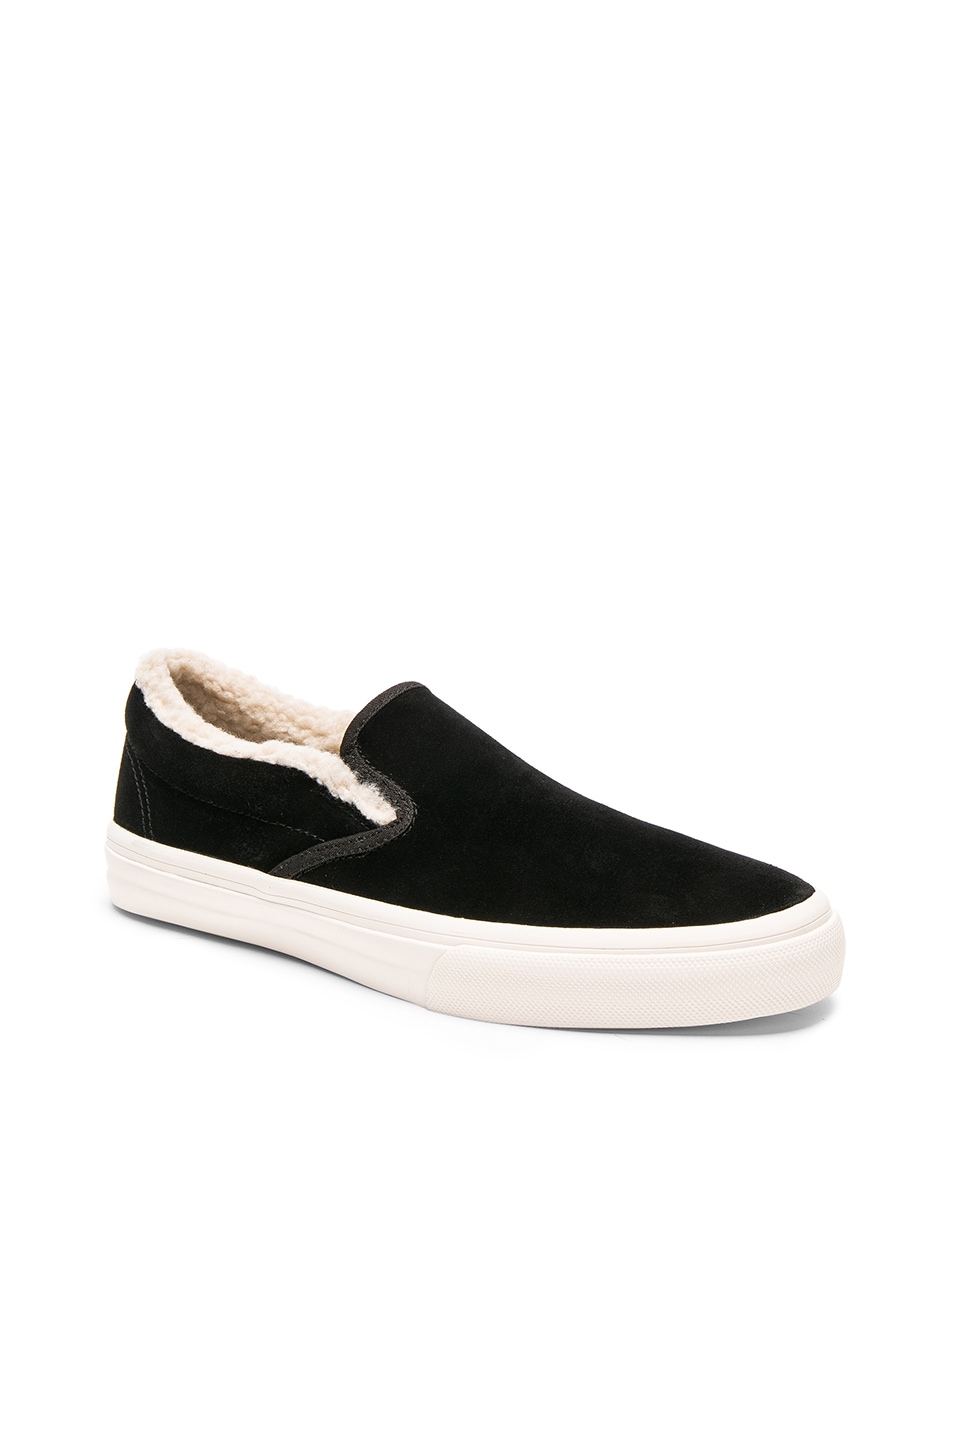 Image 1 of Junya Watanabe Velour With Sherpa Lining Slip On Shoes in Black